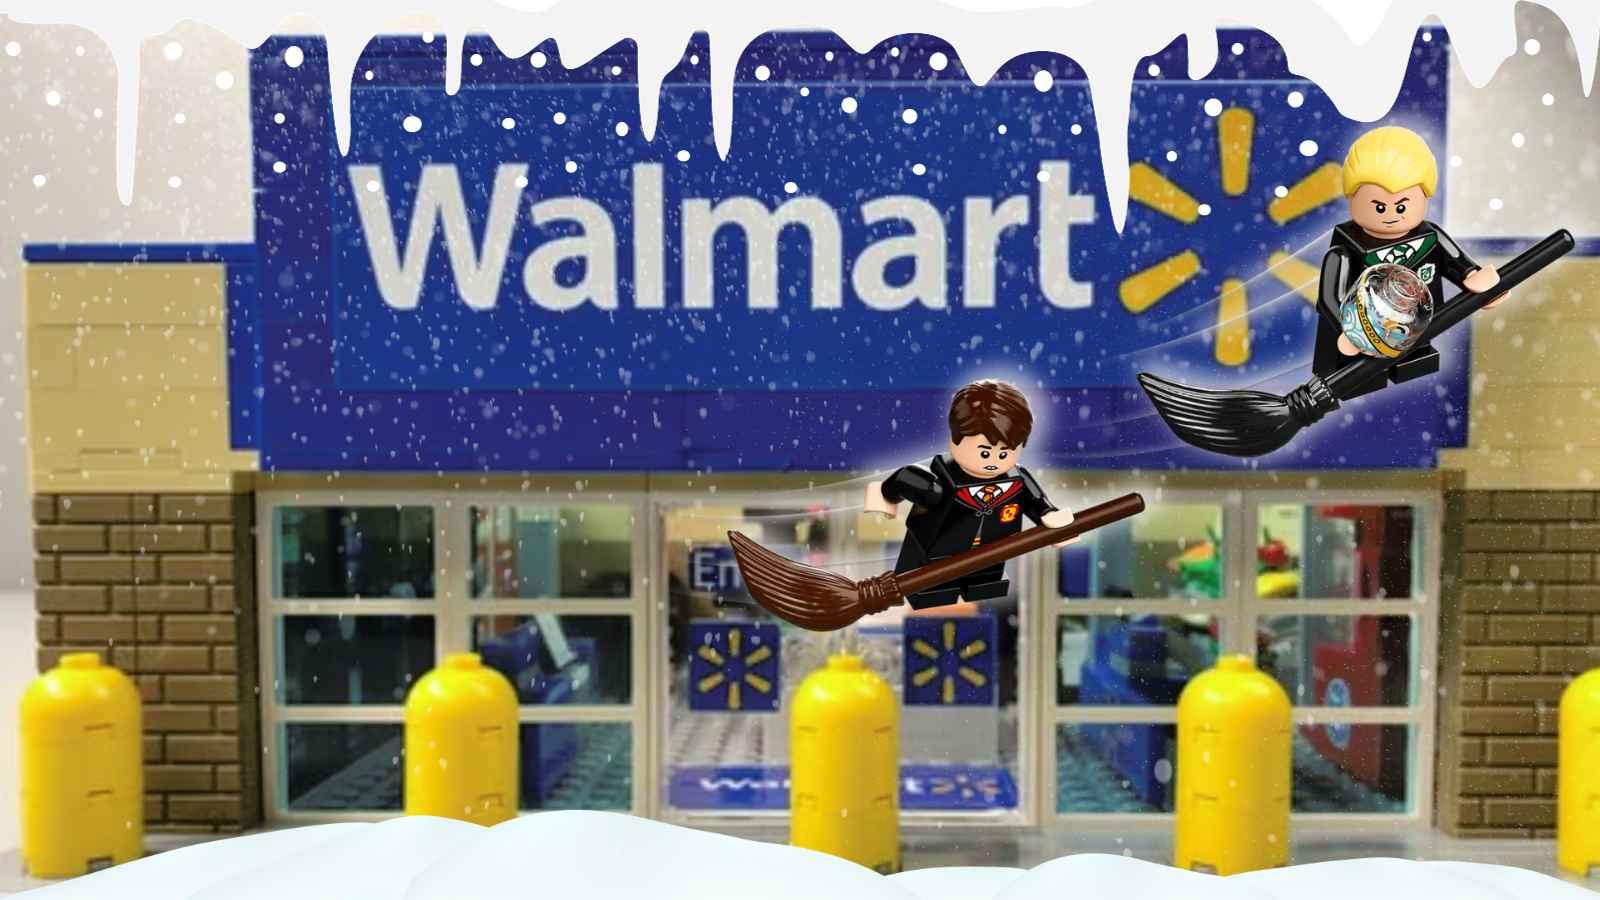 LEGO Harry Potter chasing Draco Malfoy on his broom in front of a Walmart store.